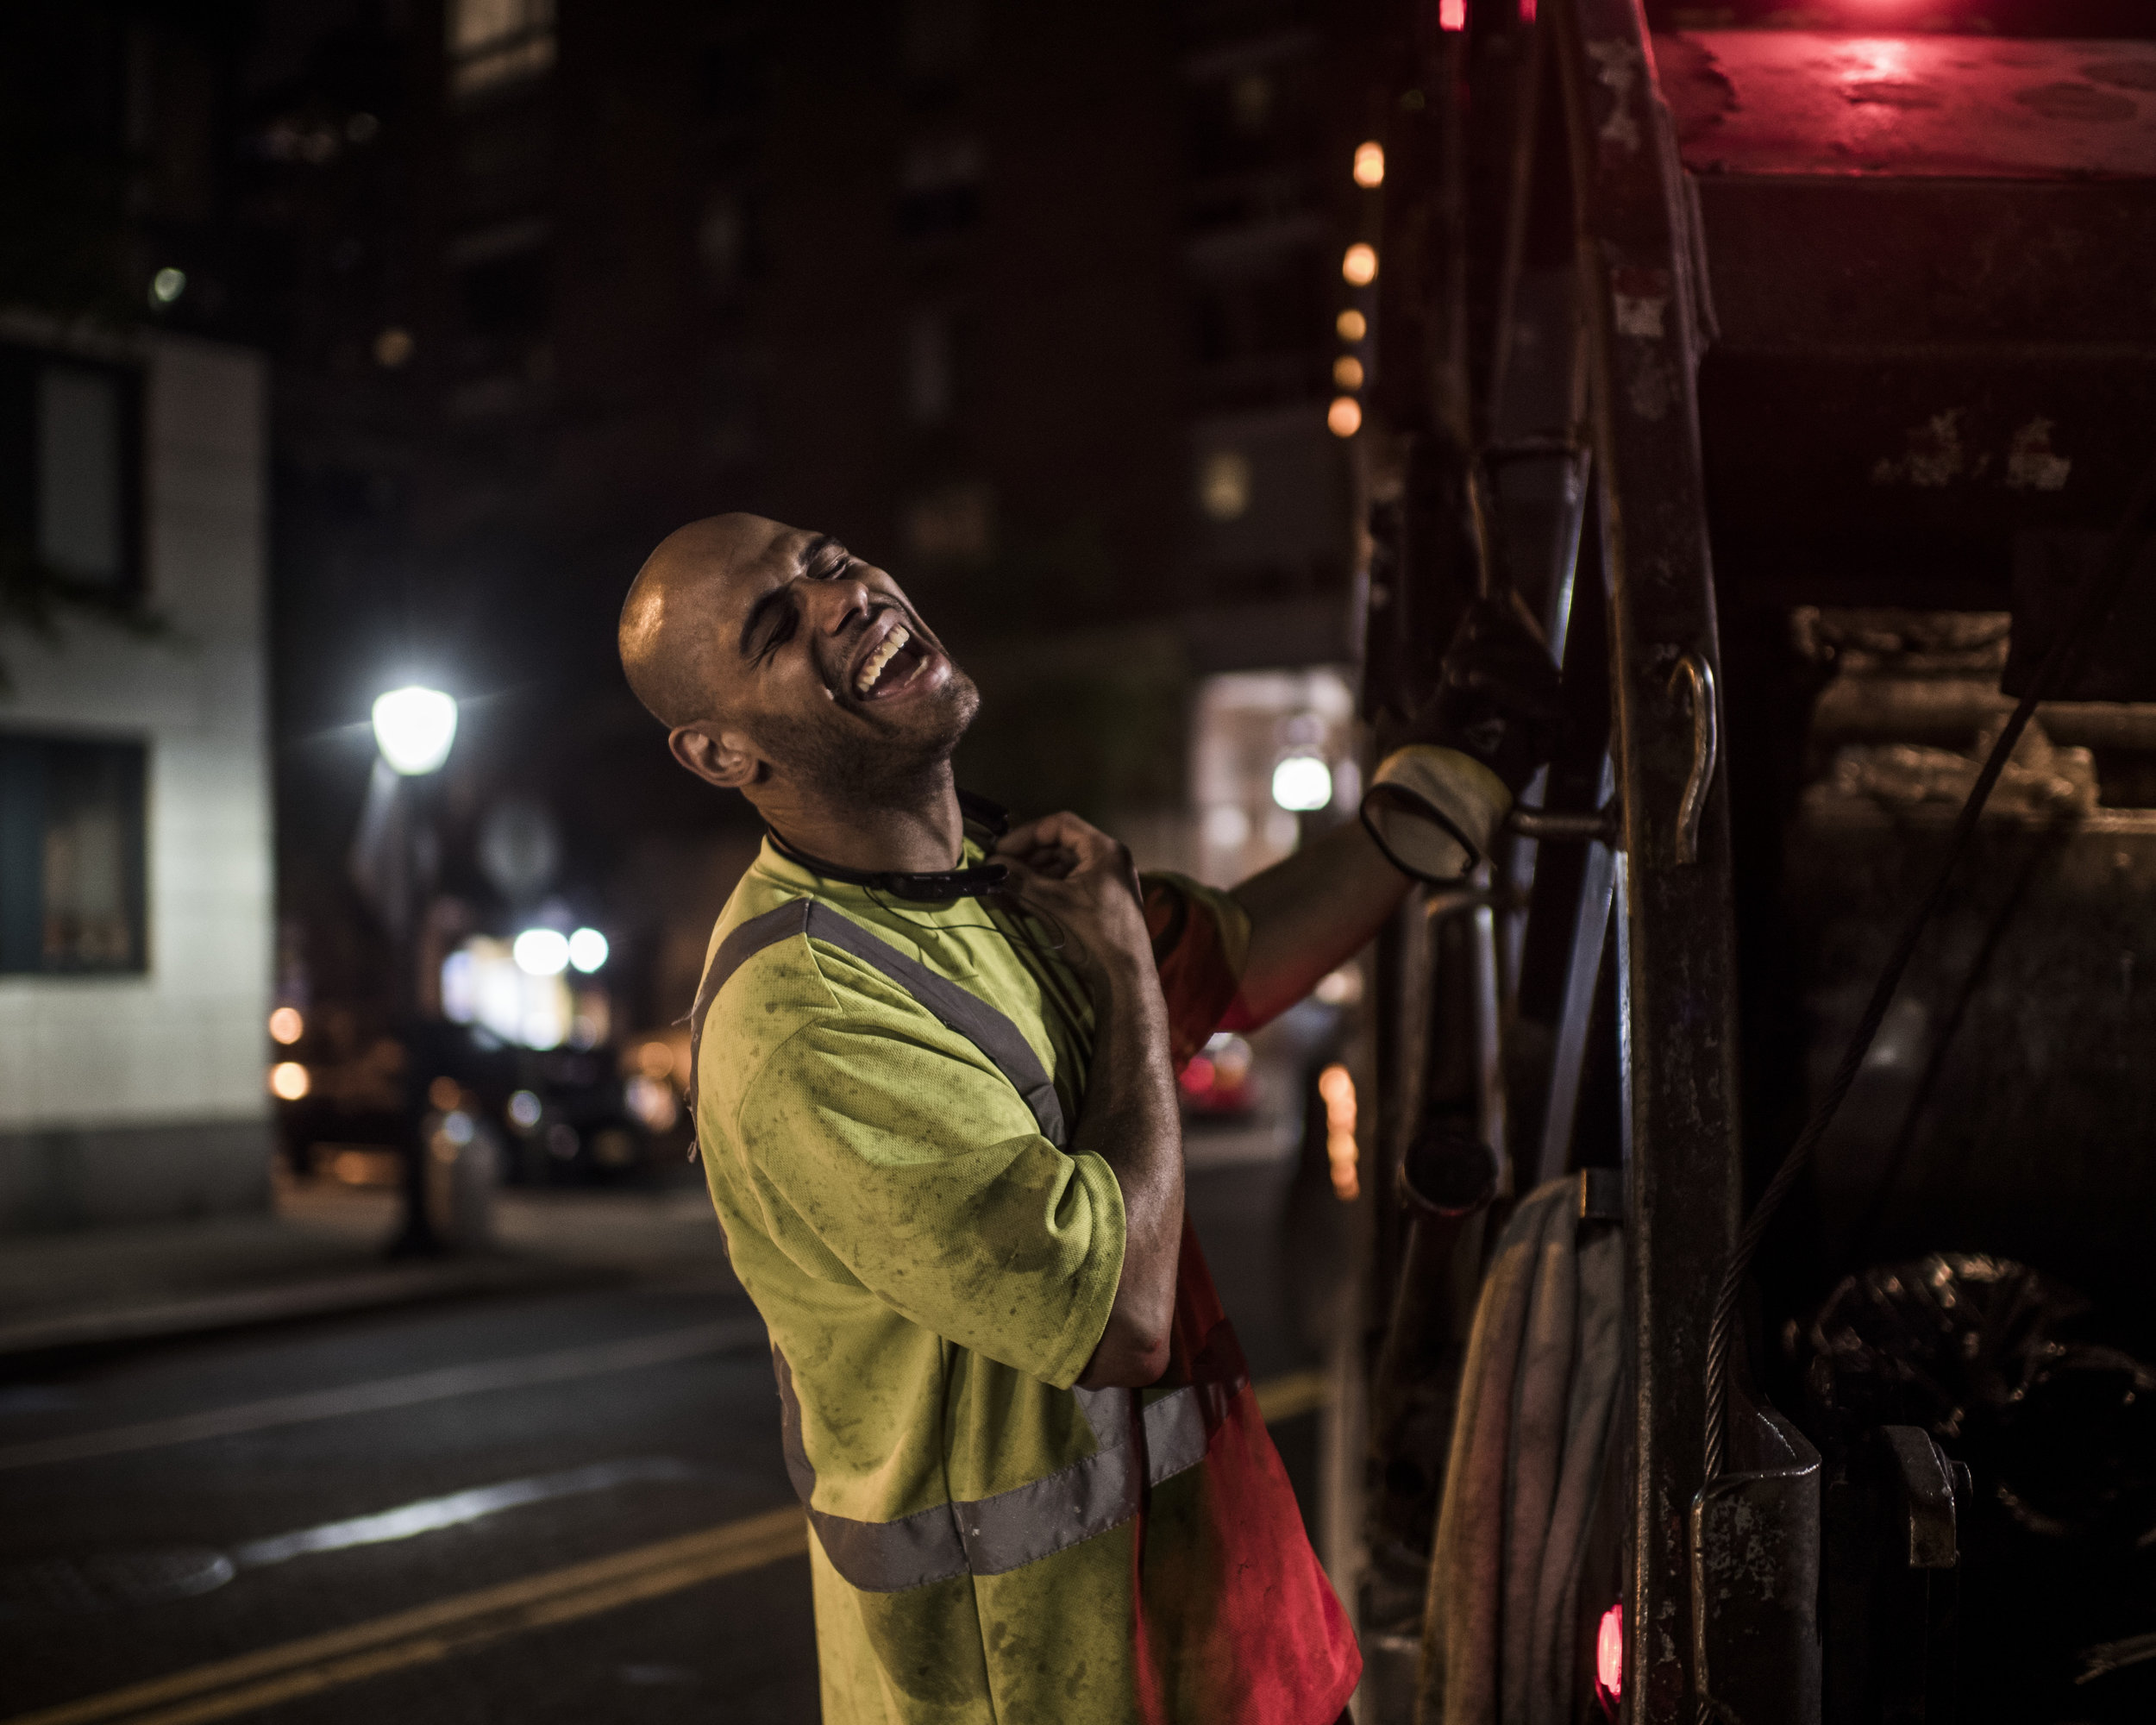  USA, New York, New York City, 24 May 2016

Waste being collected in the streets of Manhattan. Some of the bags way 50 kg, which is mainly food waste. Collection is often done by private contractors.

Kadir van Lohuizen / NOOR 